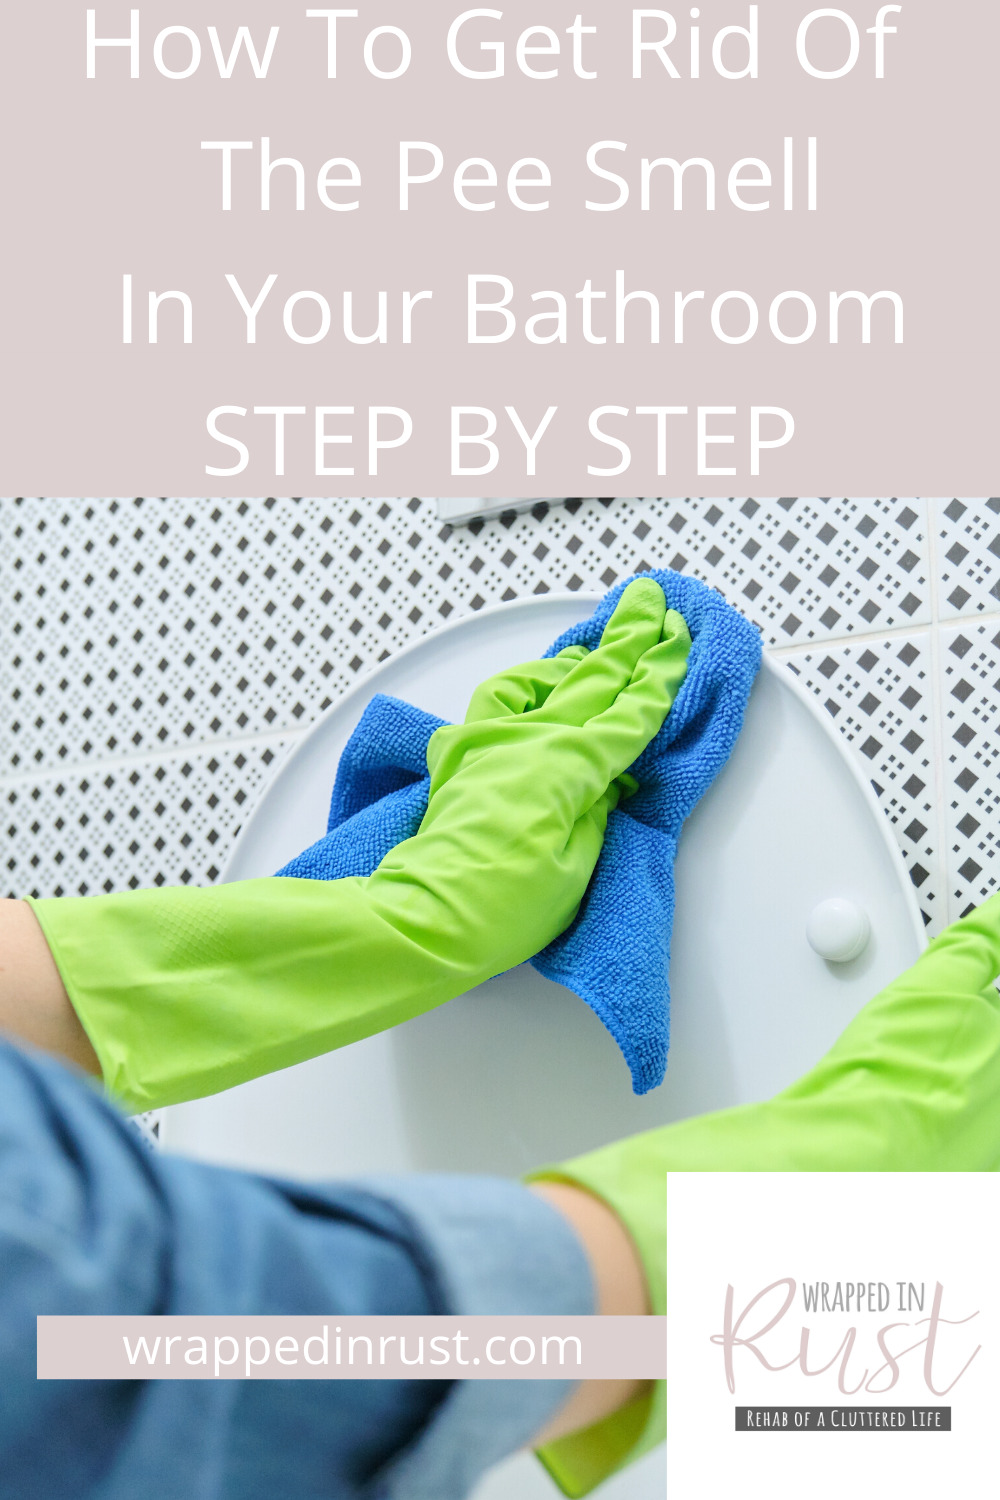 Does your bathroom stink? You know, you walk in and it smells like pee. If you have boys in the house, it's likely that your bathroom could smell. But, no need to worry. Warpped In Rust has you covered. Keep reading for tips that teach you how to get rid of the pee smell in your bathroom. #peesmell #howtogetridofurineodor #bathroomcleaning #wrappedinrust